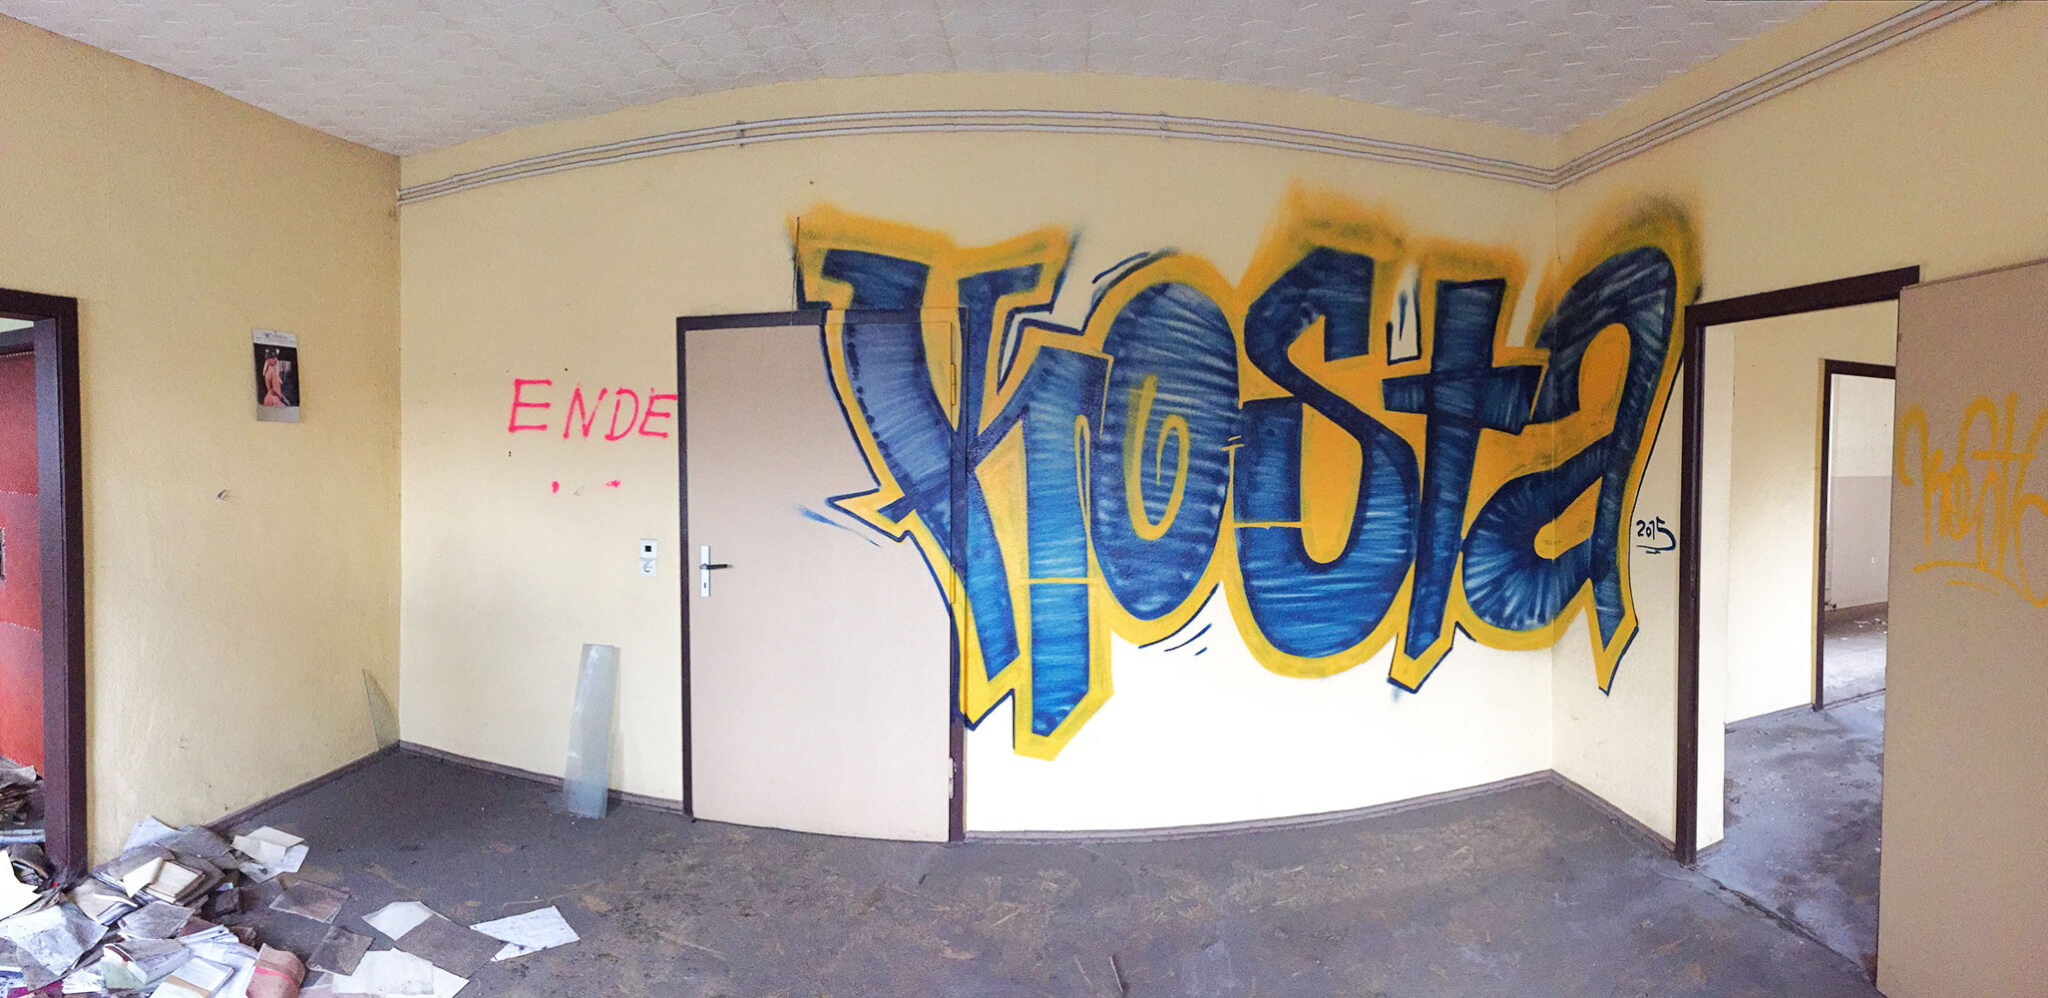 Quick inside Bombing by Kosta 2015